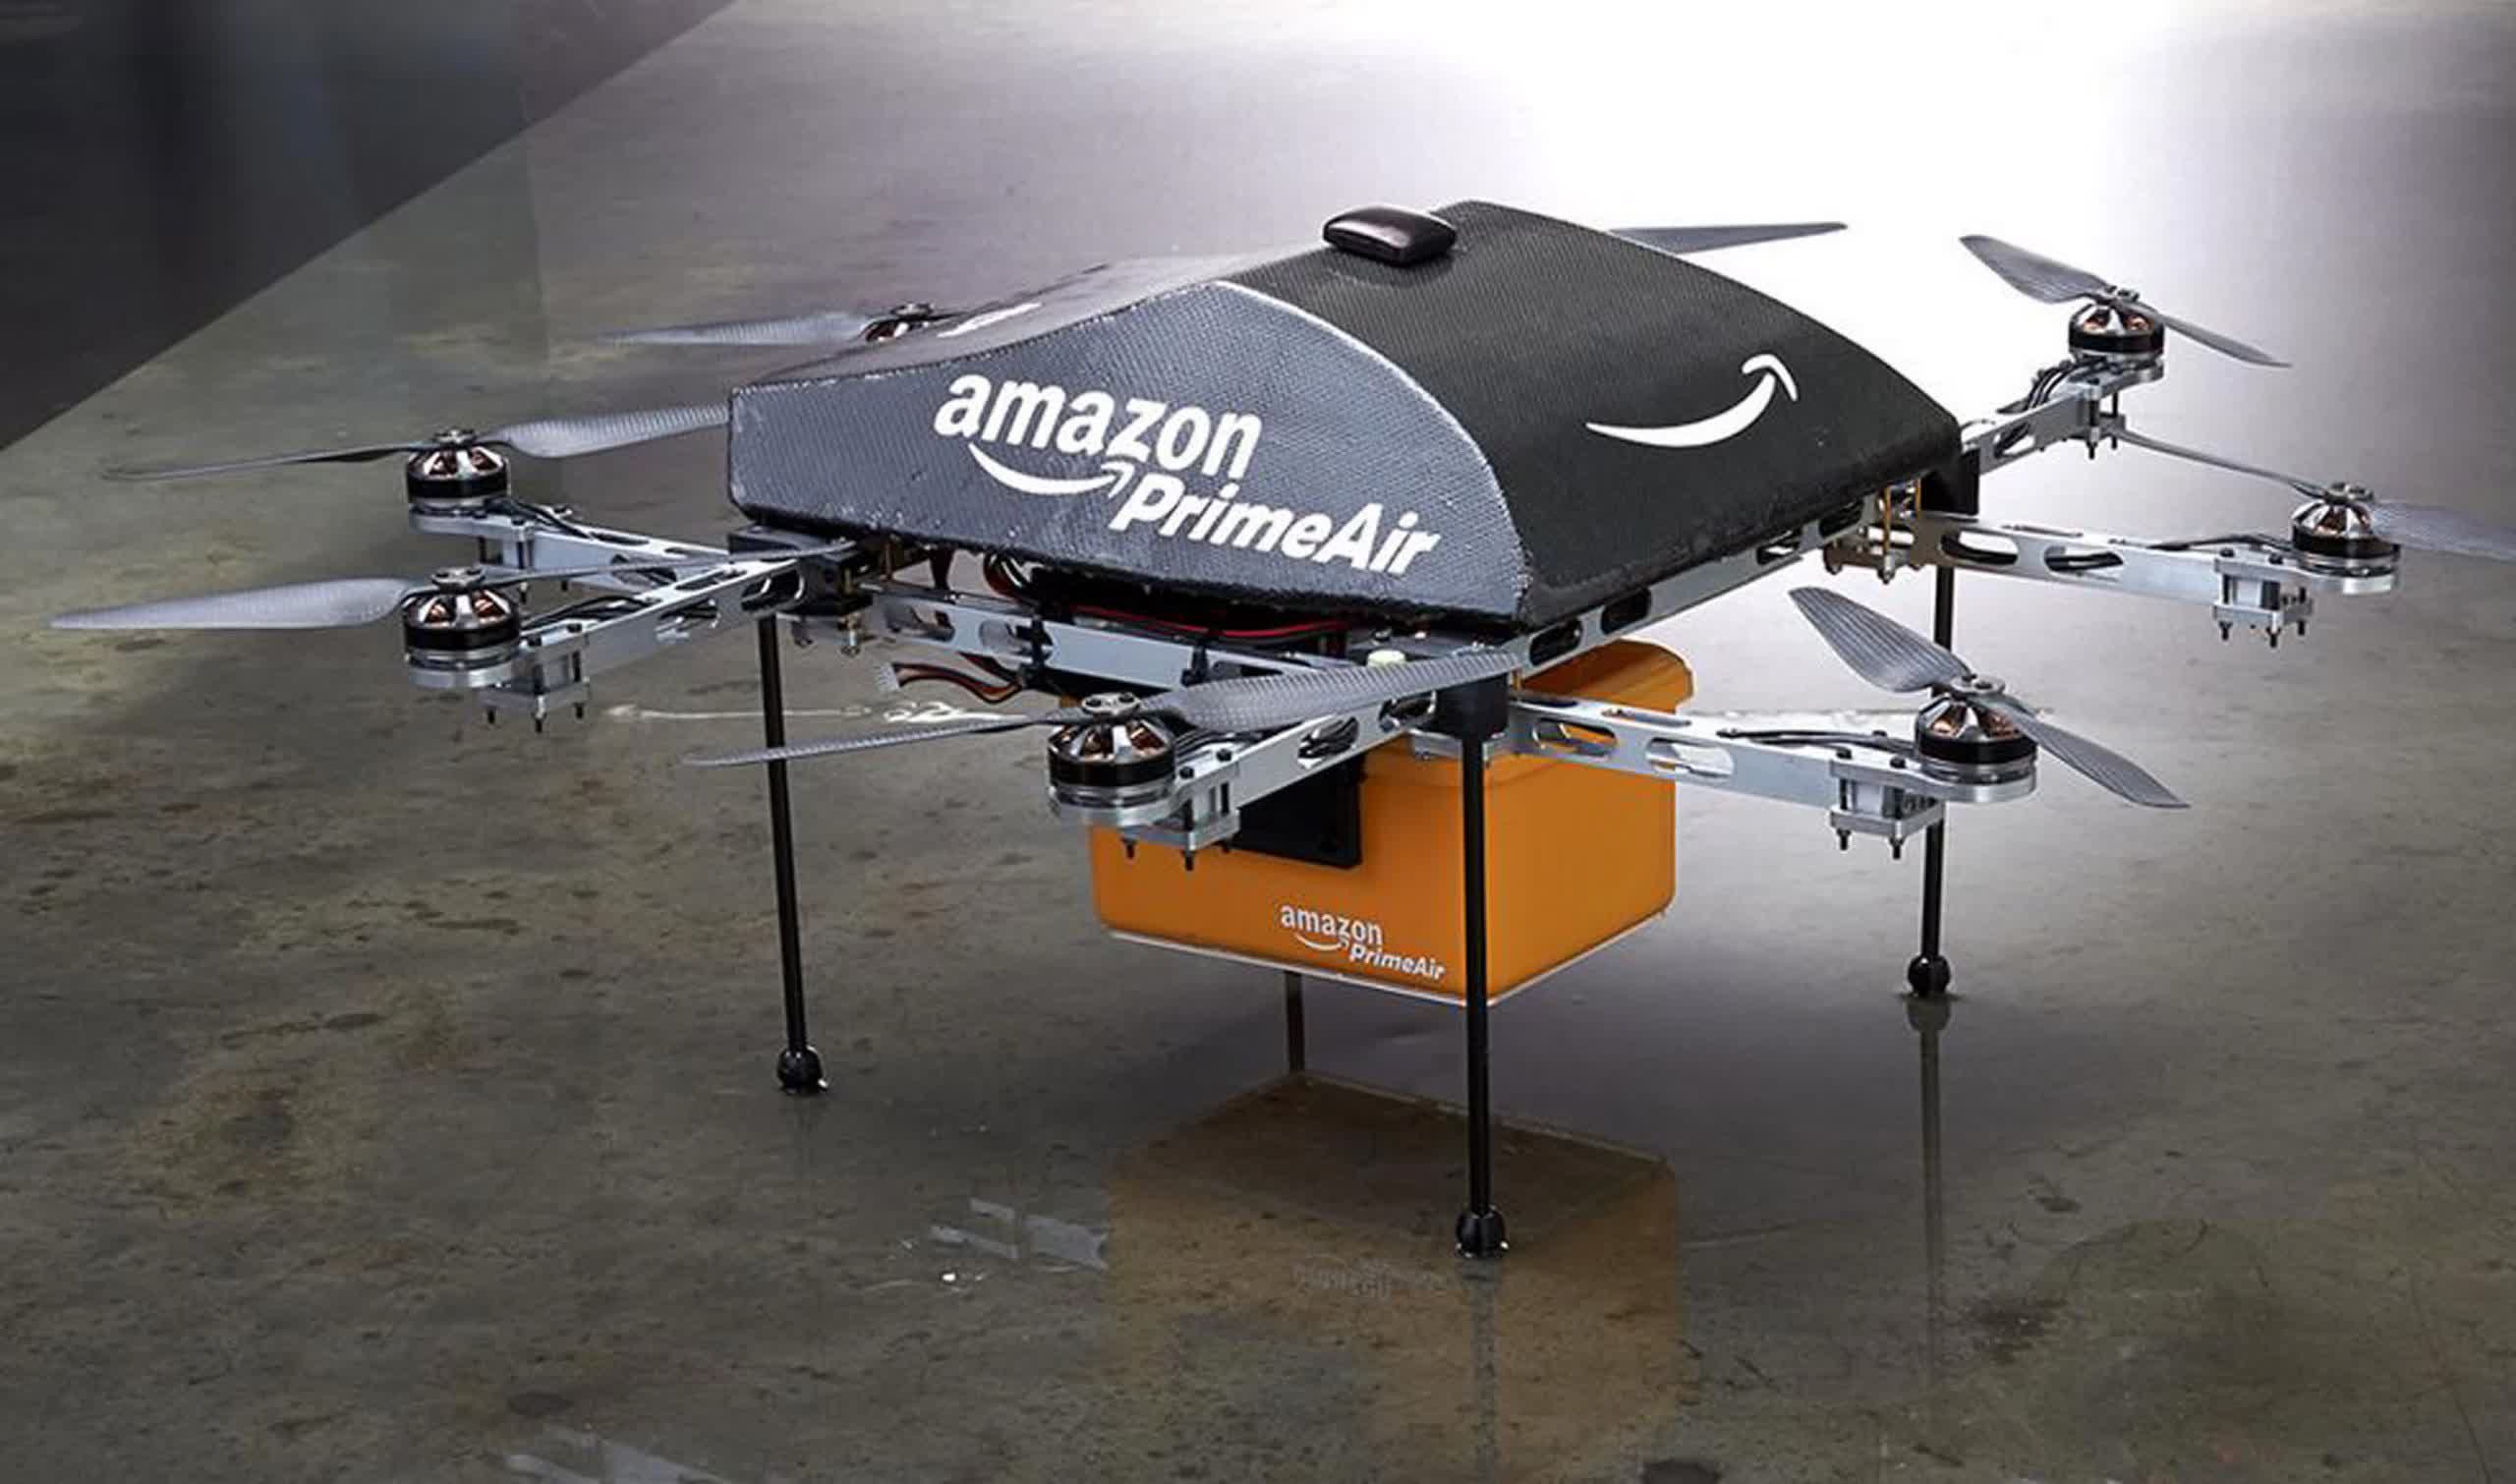 Amazon's drone-delivery service rolled out in California and Texas